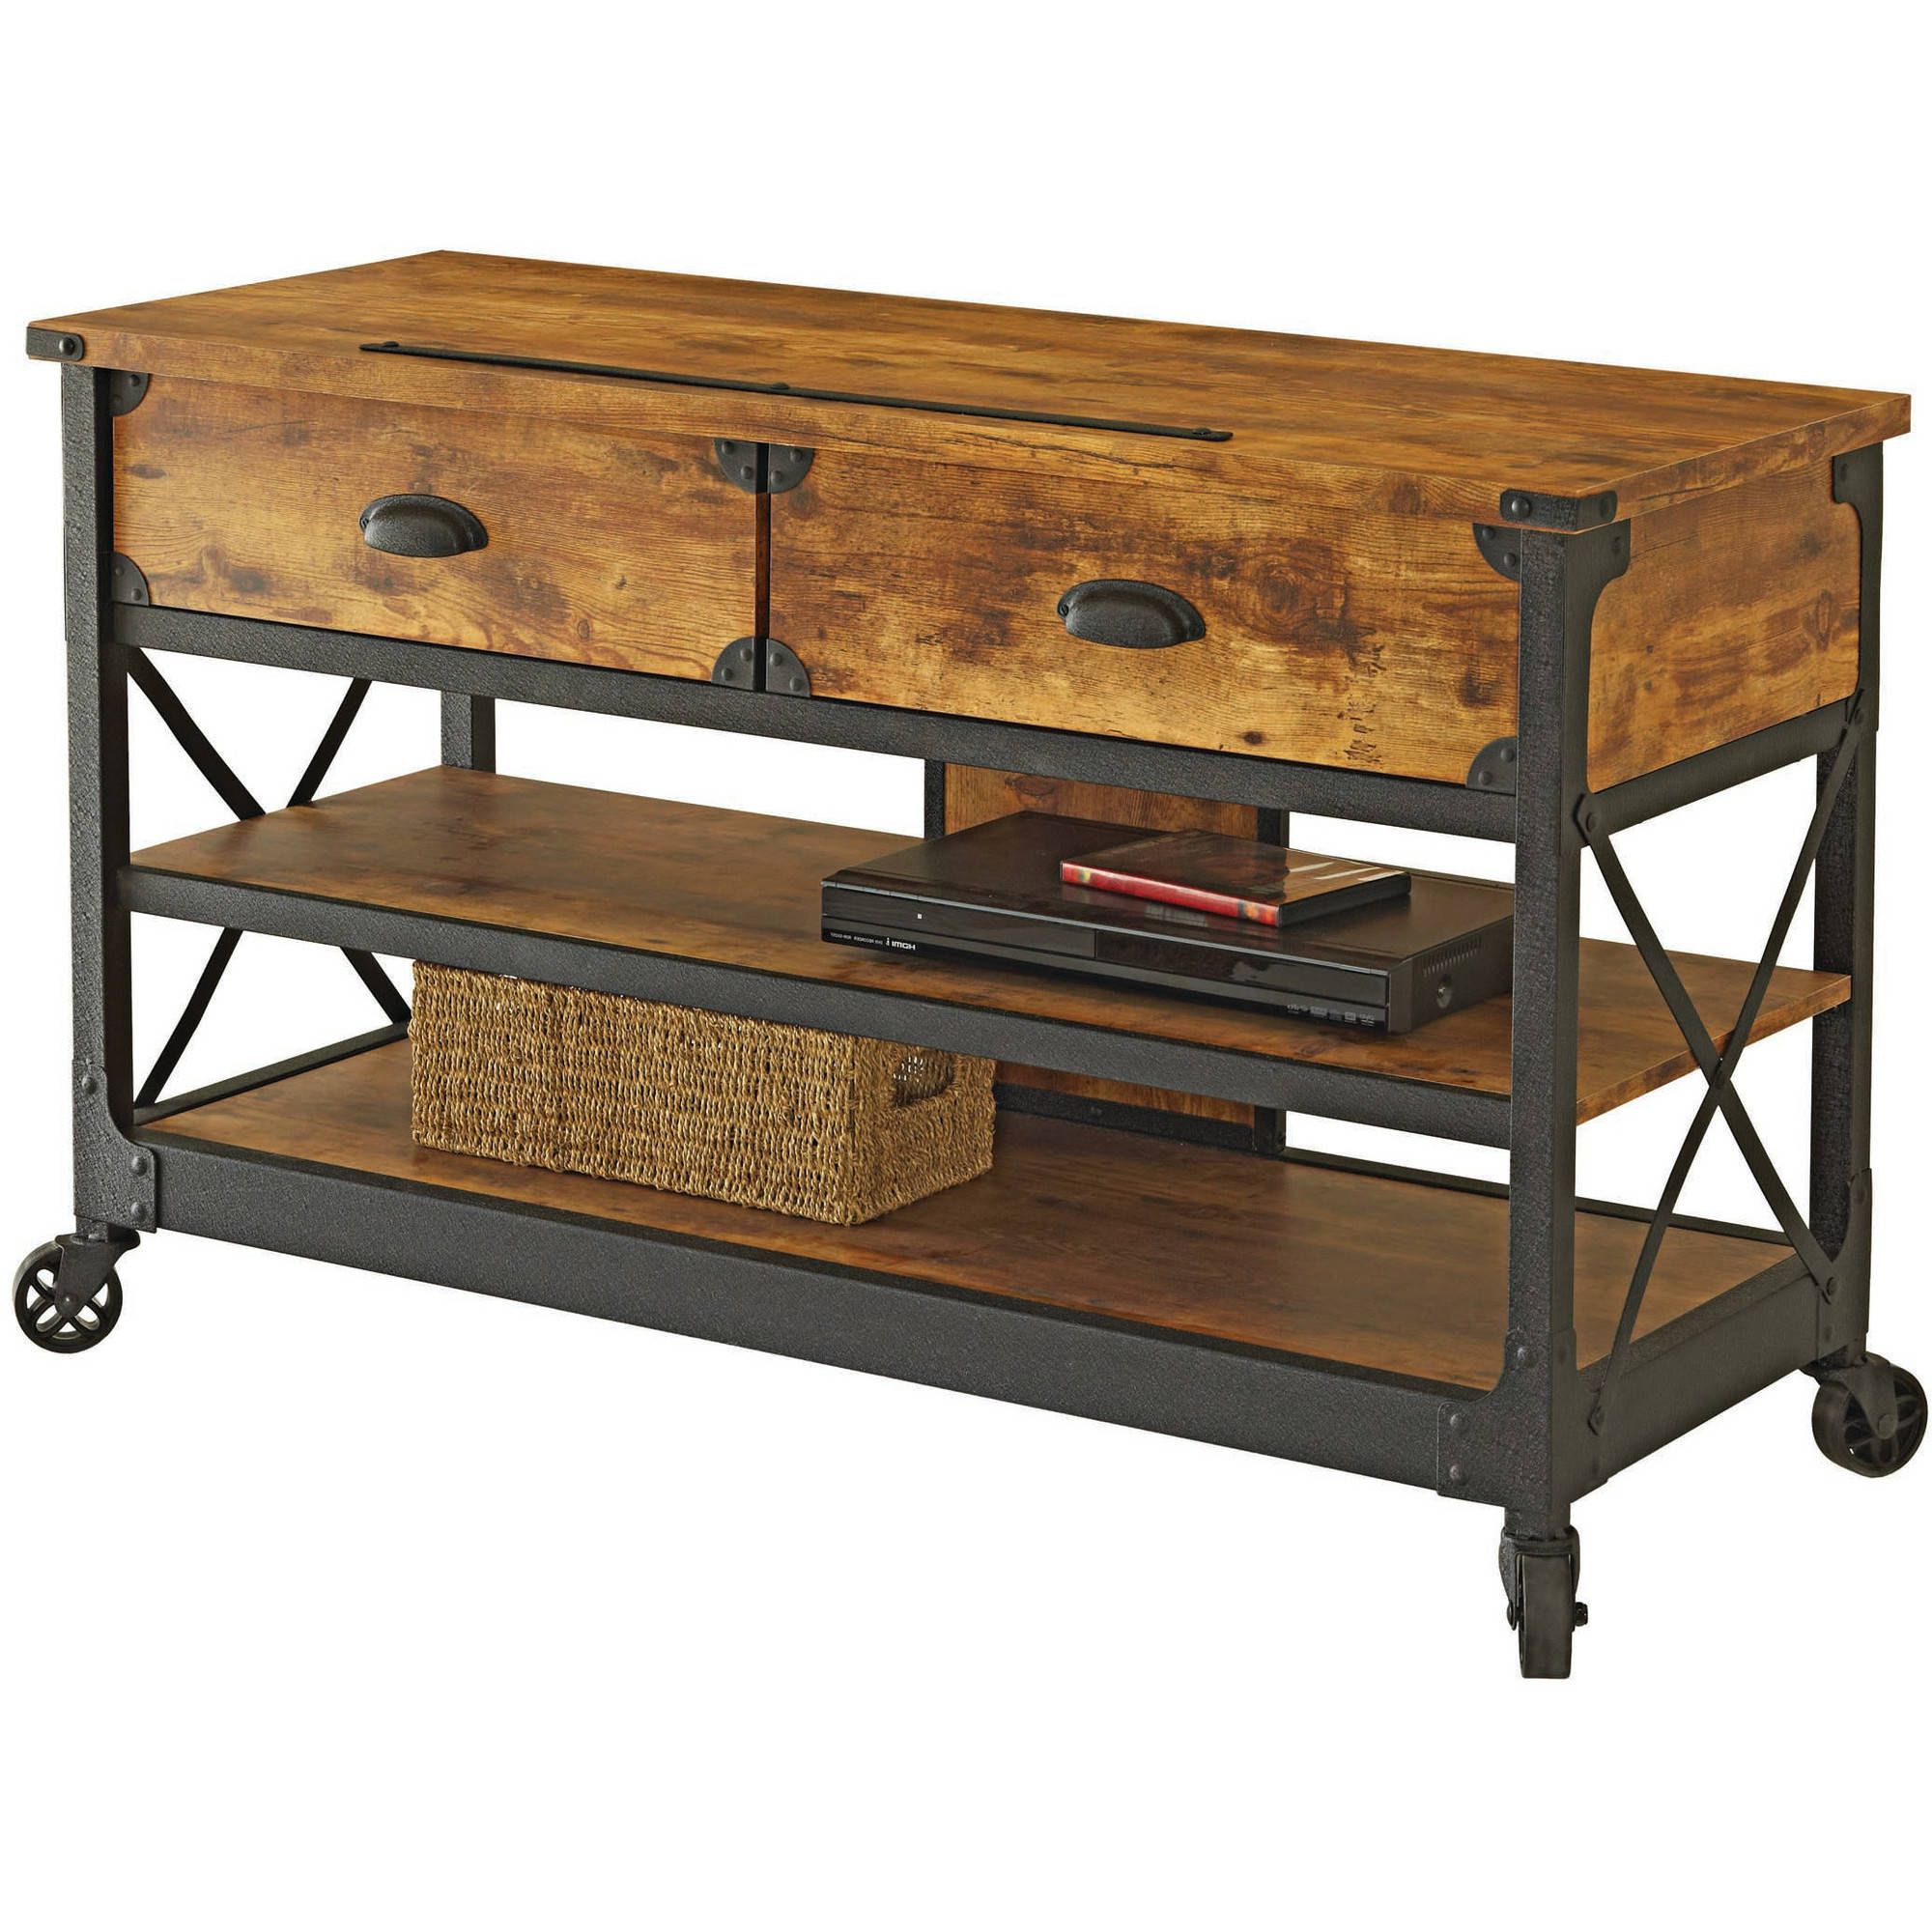 Better Homes & Gardens Rustic Country Tv Stand For Tvs Up To 52 With Regard To Most Current Pine Tv Stands (Photo 6 of 20)